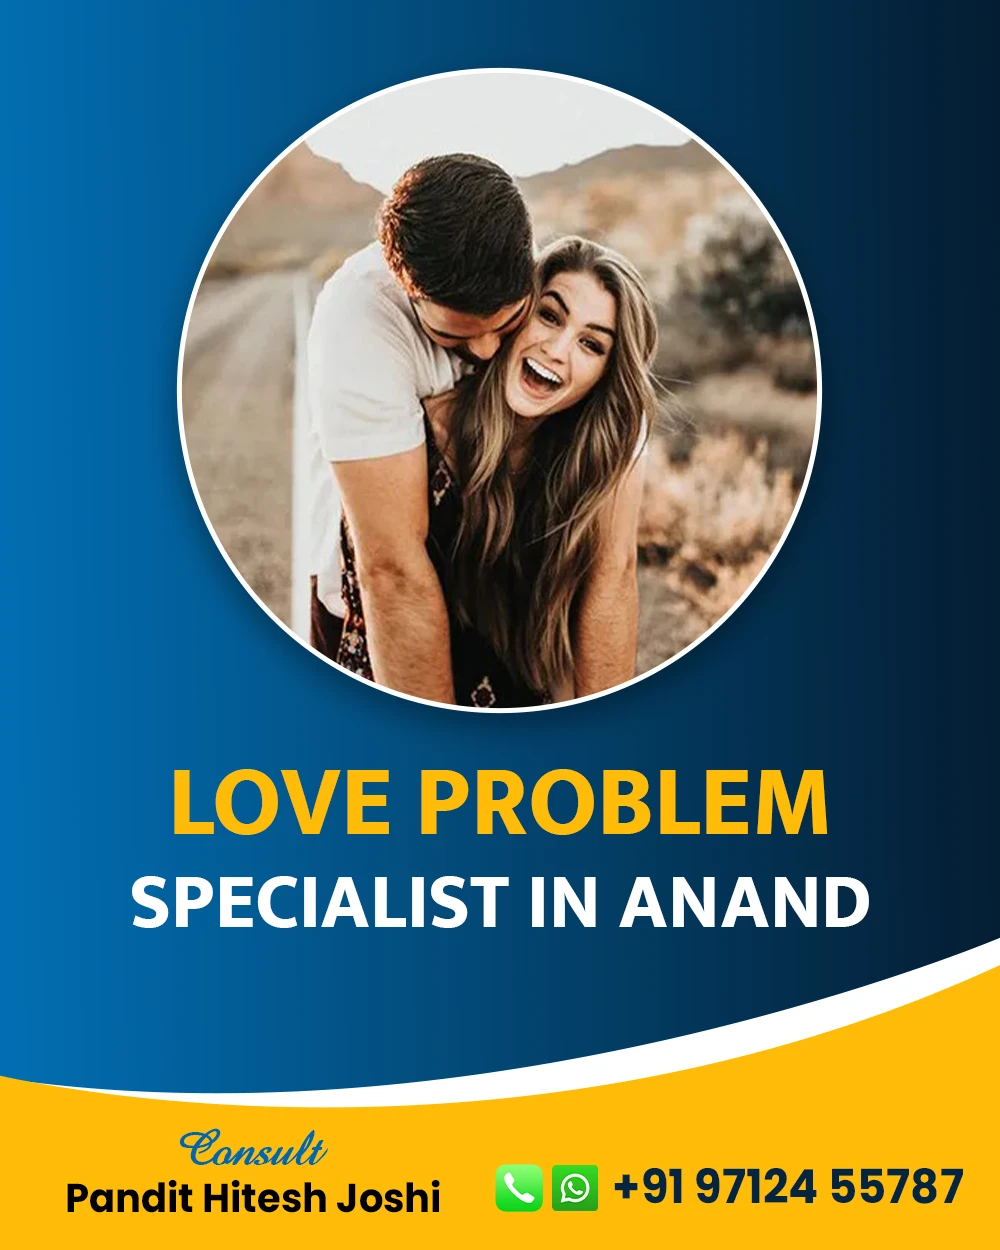 Love Problem Specialist in Anand